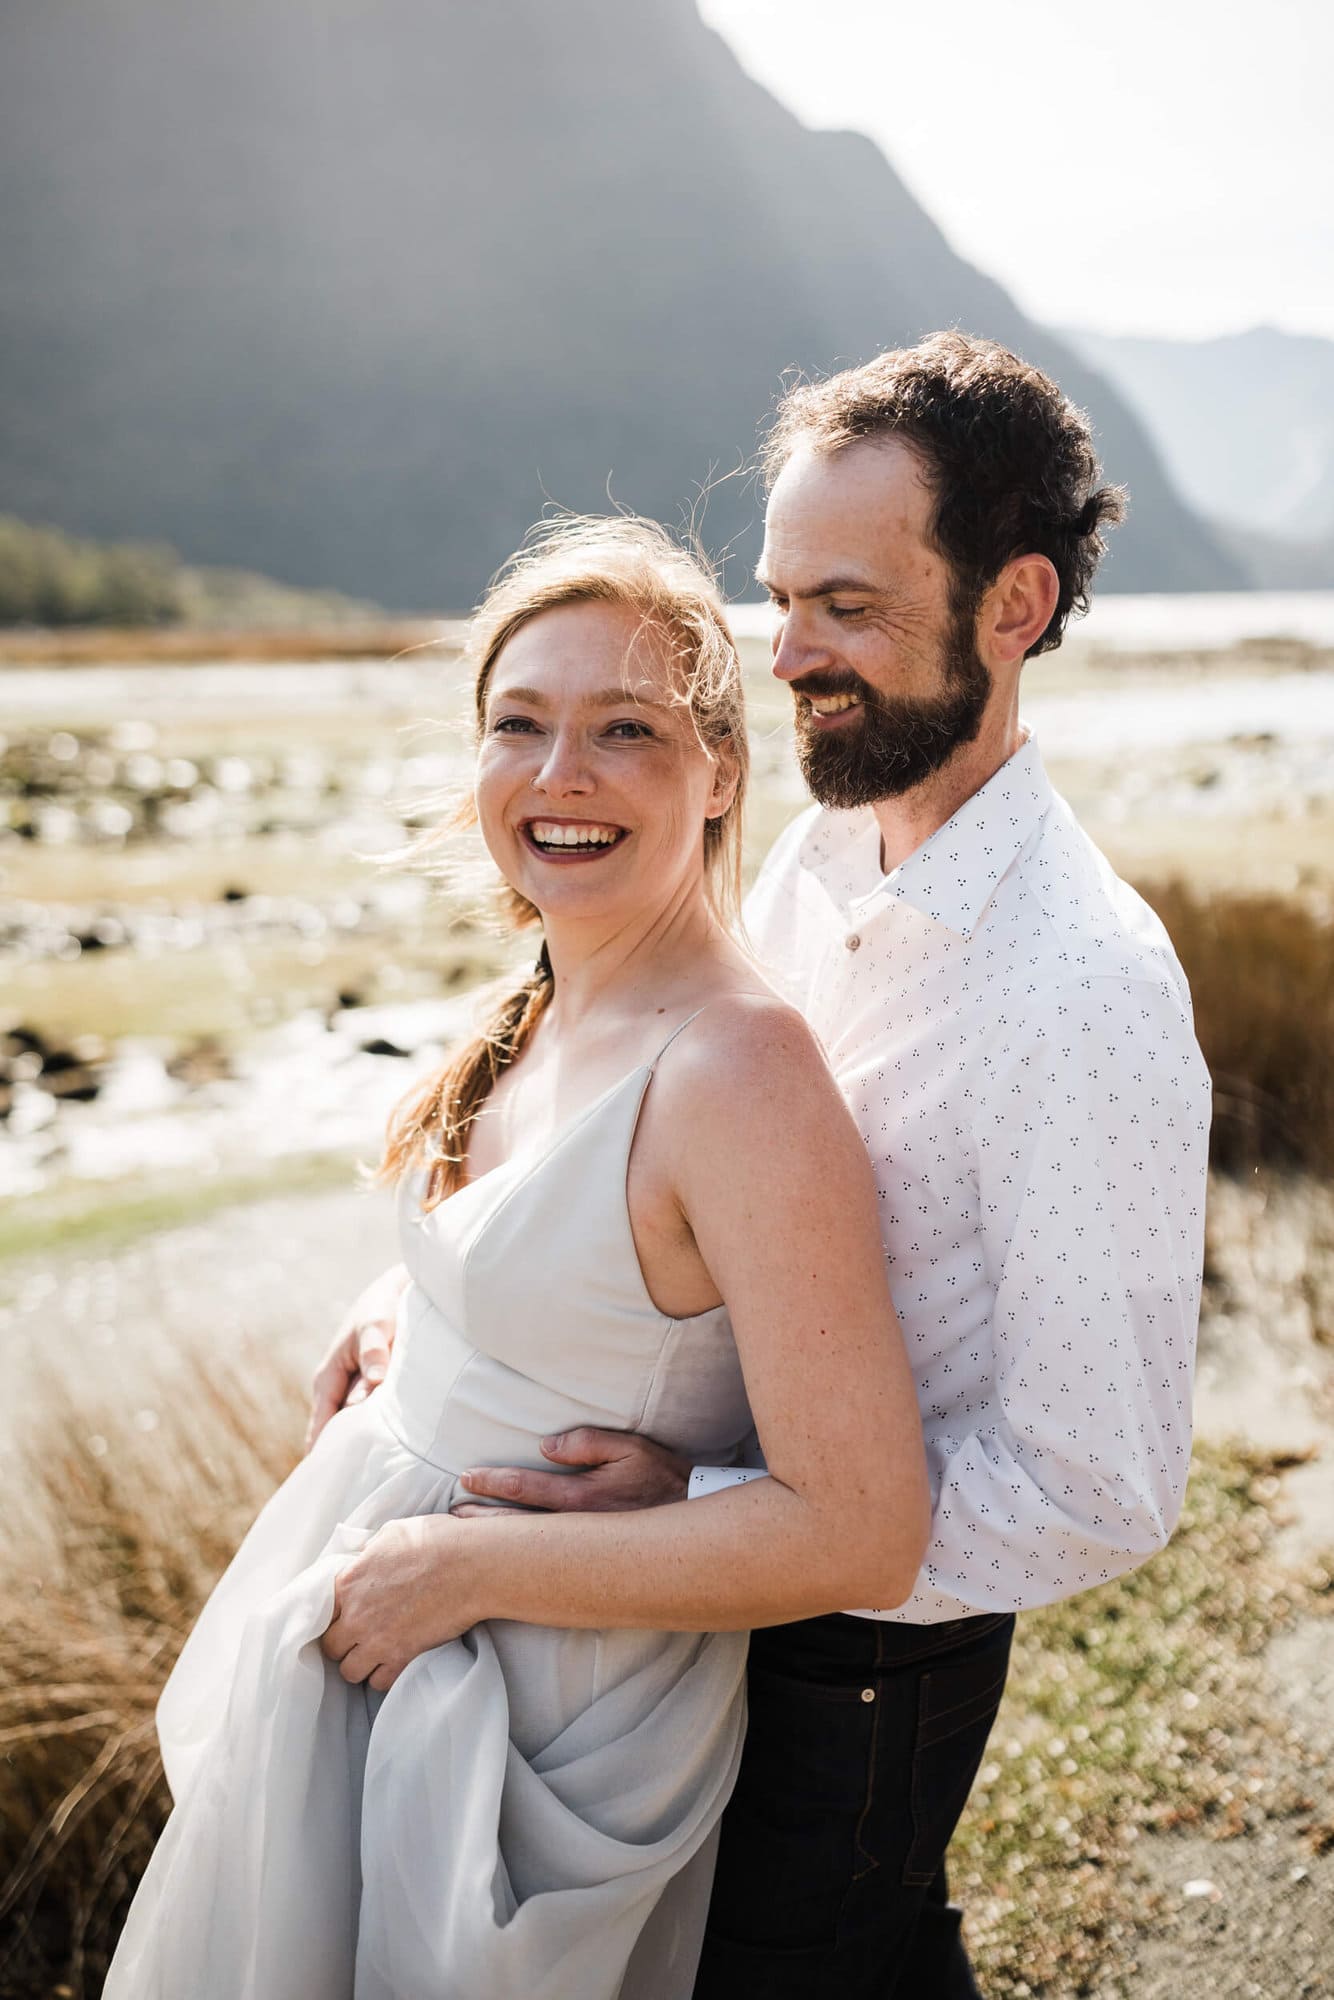 I'm so stoked to share this EPIC Queenstown elopement style vow renewal. Complete with Lord of the Rings and Taylor Swift related locations. 